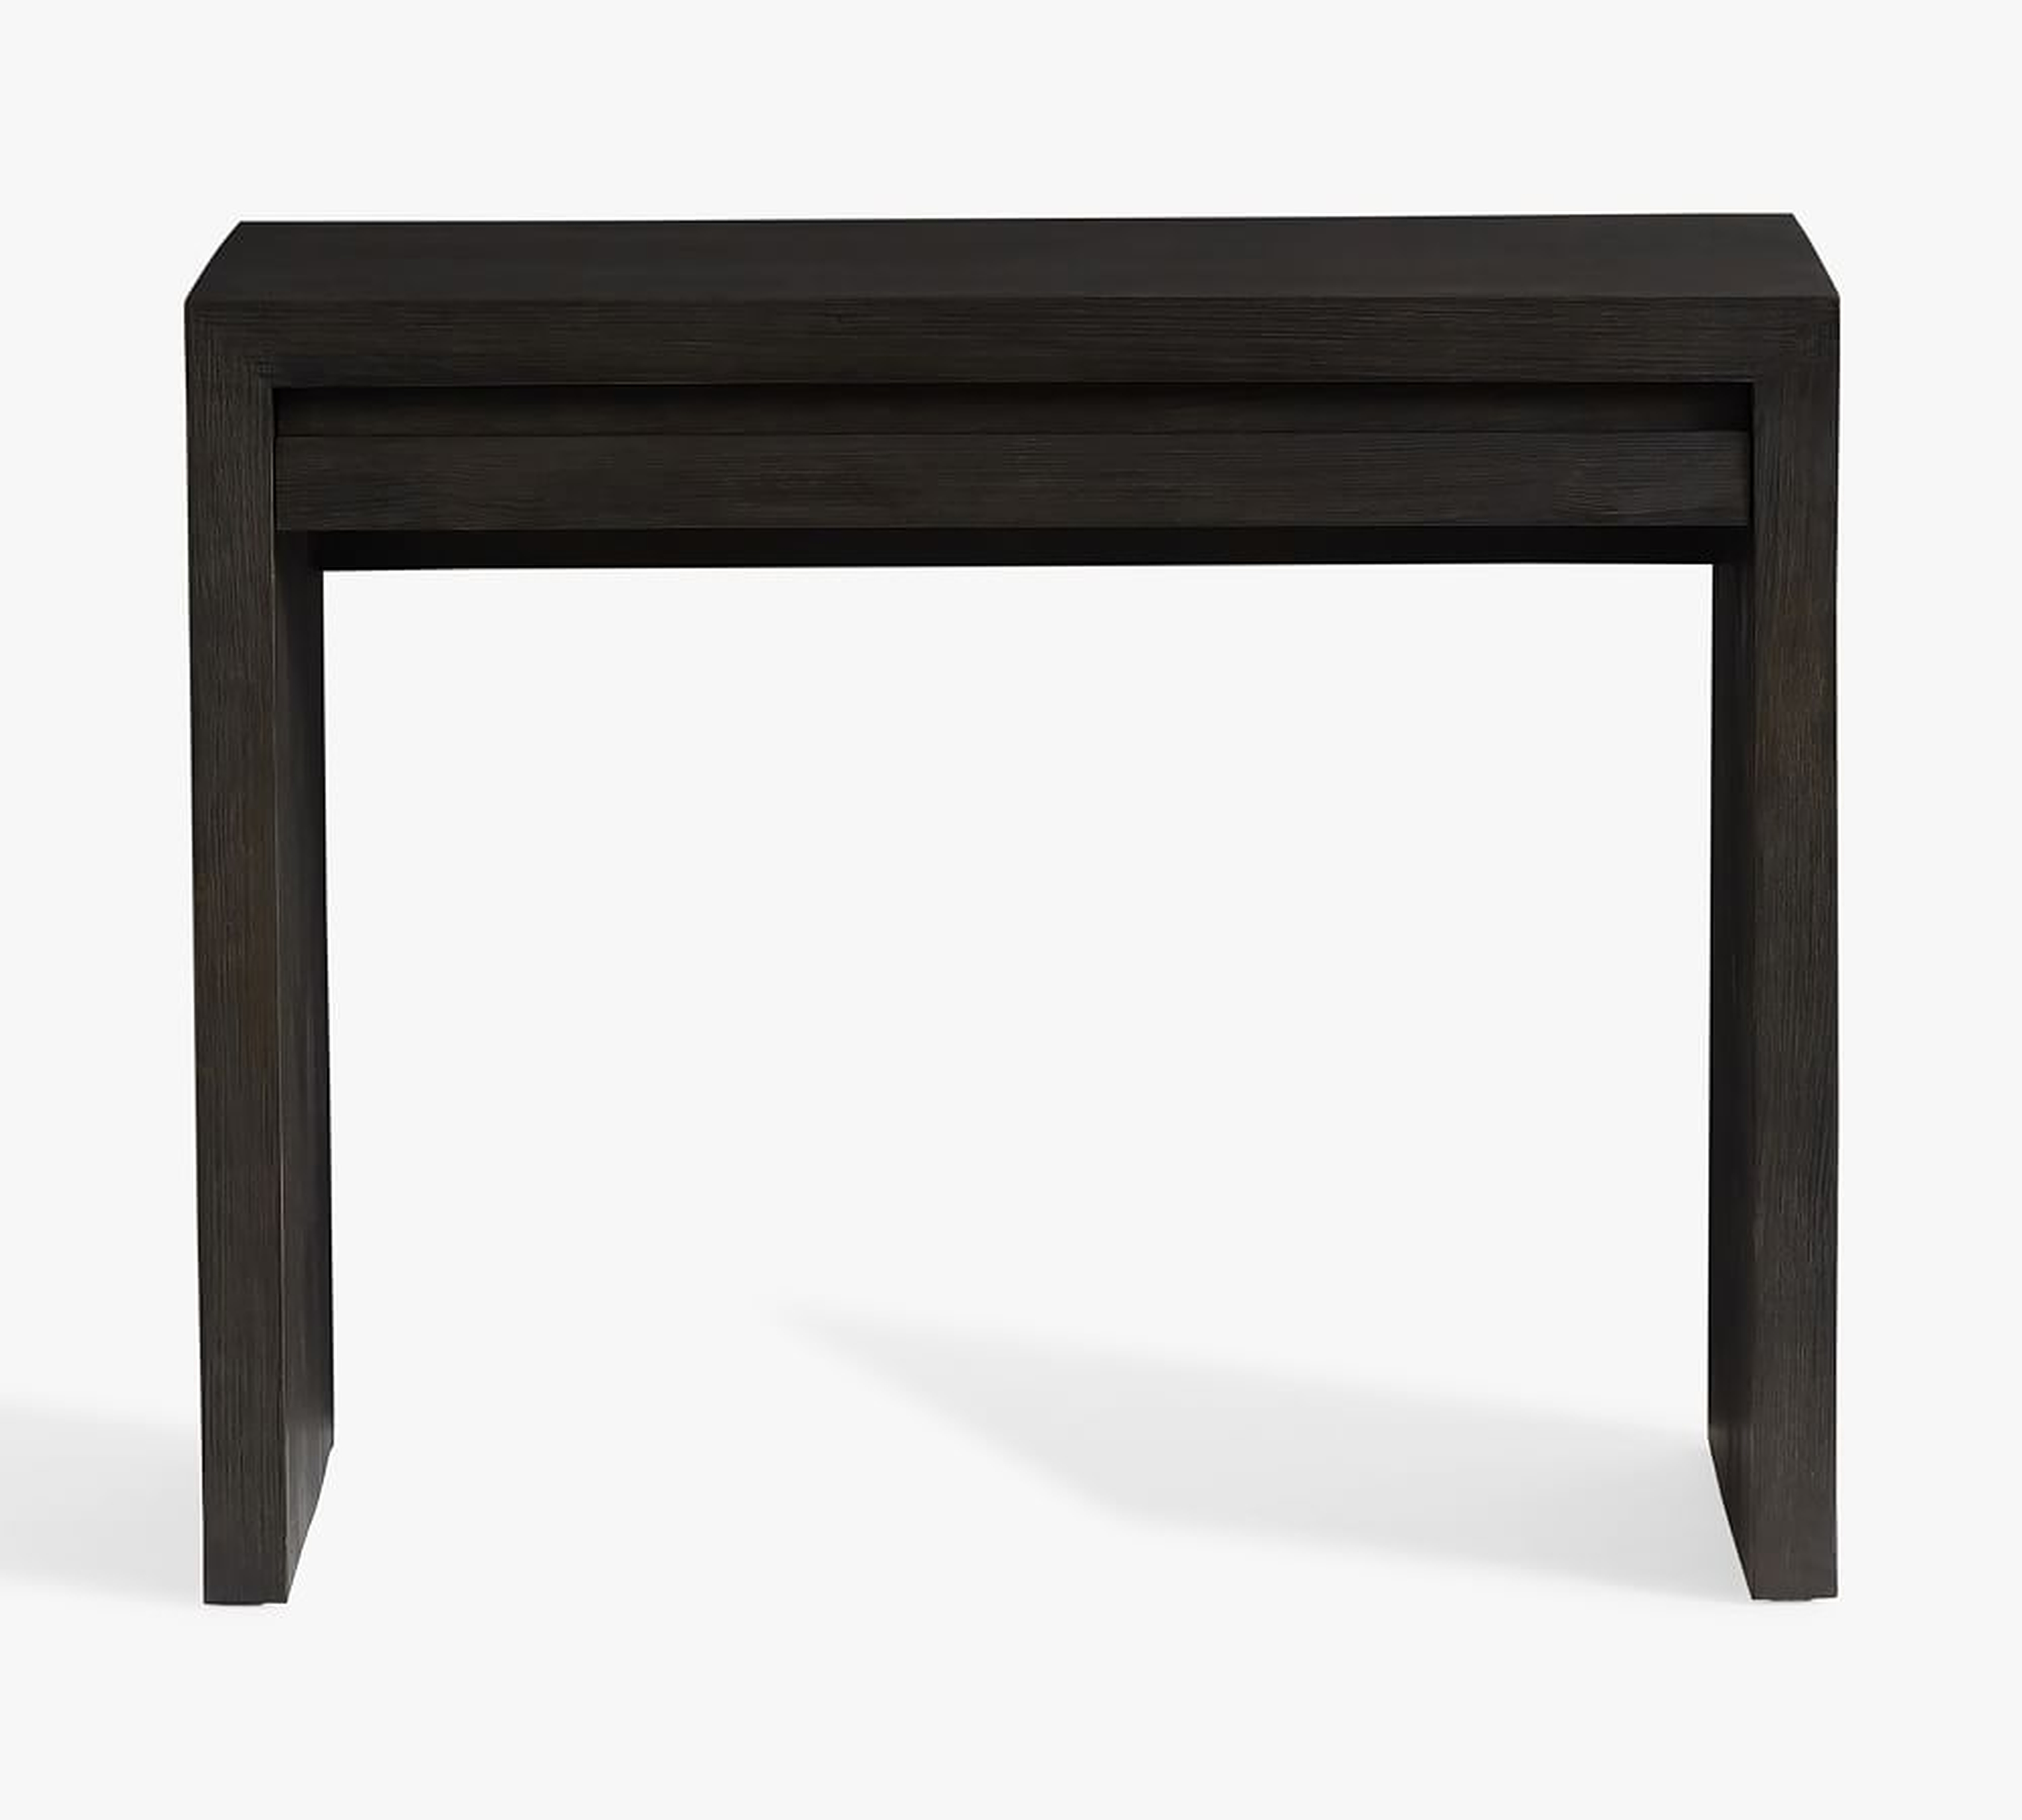 Folsom 38" Writing Desk with Drawer, Charcoal - Pottery Barn